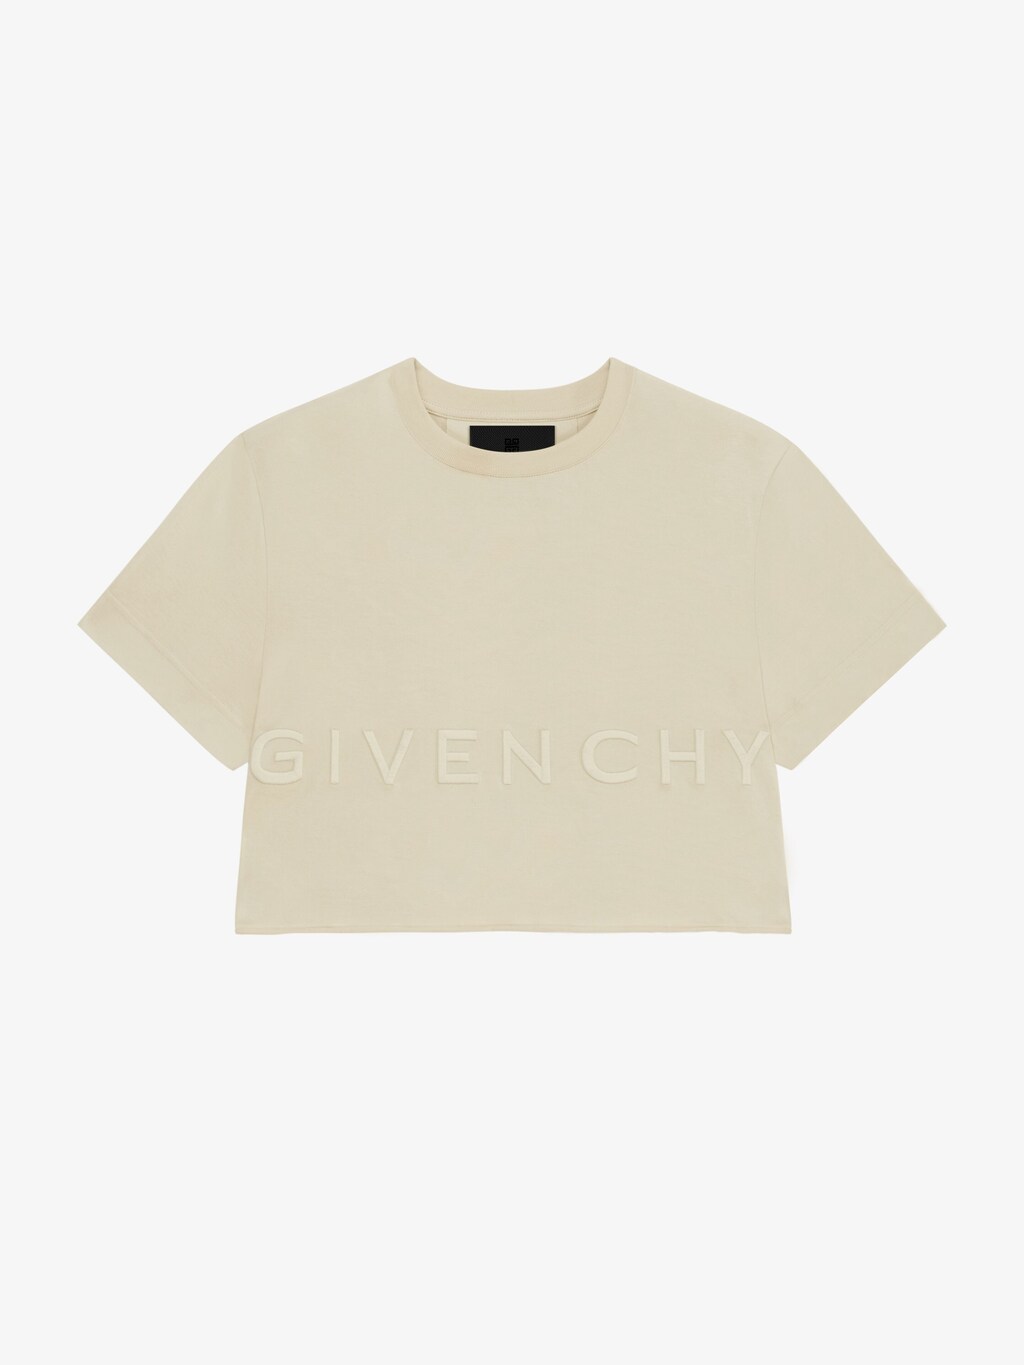 Women's Designer T-Shirts: Black, White & Colored T-Shirts | Givenchy US